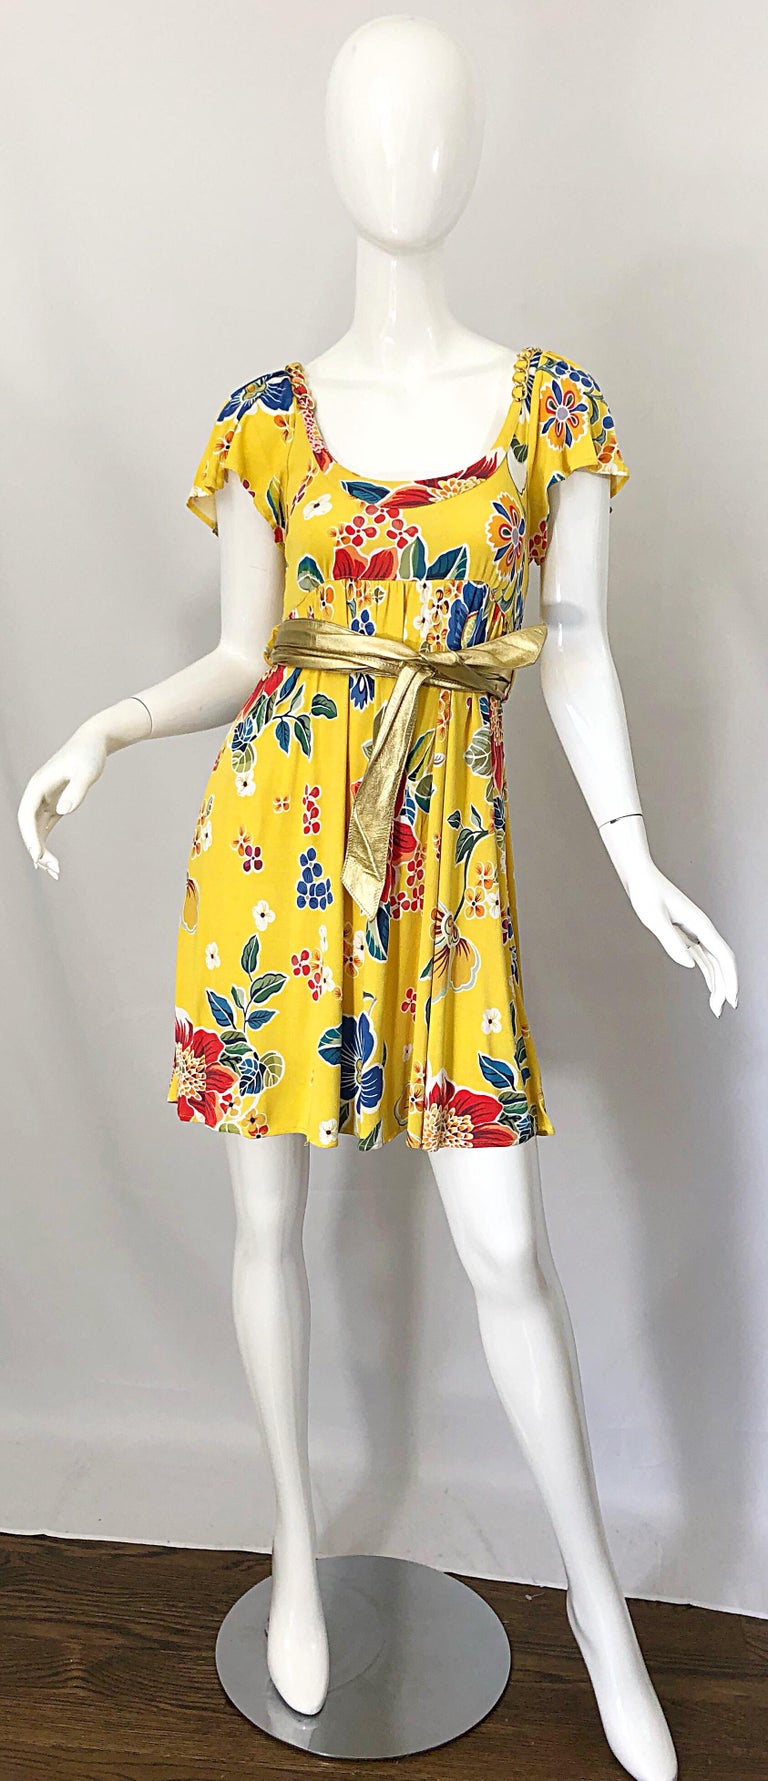 Sweet late 1990s DOLCE & GABBANA yellow rayon jersey chainlink belted vintage babydoll dress! Features a vibrant yellow, with flowers in red, green, blue and white. Gold metal chainlinks around the neckline. Original detachable gold metallic leather